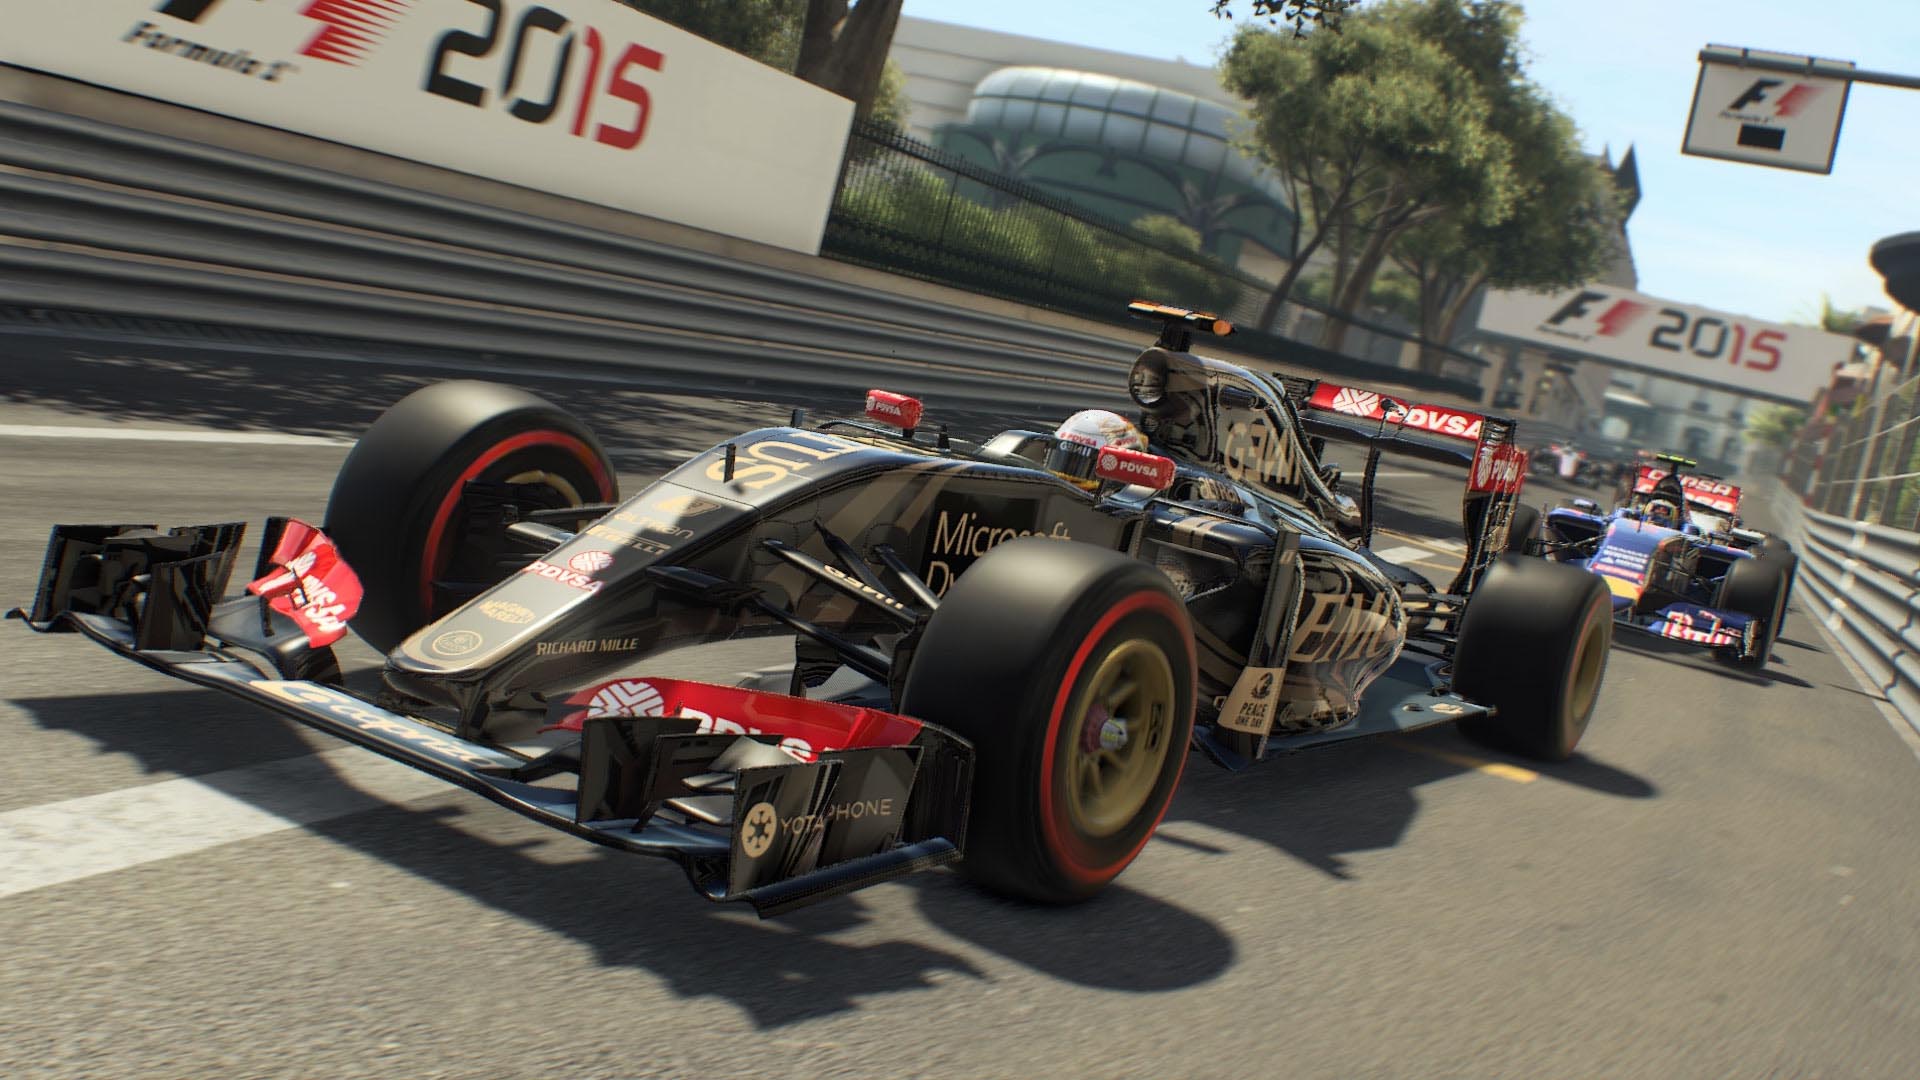 First up is the newest installment in the venerable F1 game series from developer Codemasters. It features an all-new game engine which delivers better graphics and physics. However, fans of <i>F1 2014</i> should note that there is no co-op or career mode this time around. | <b>For:</b> PC, PS4, Xbox One